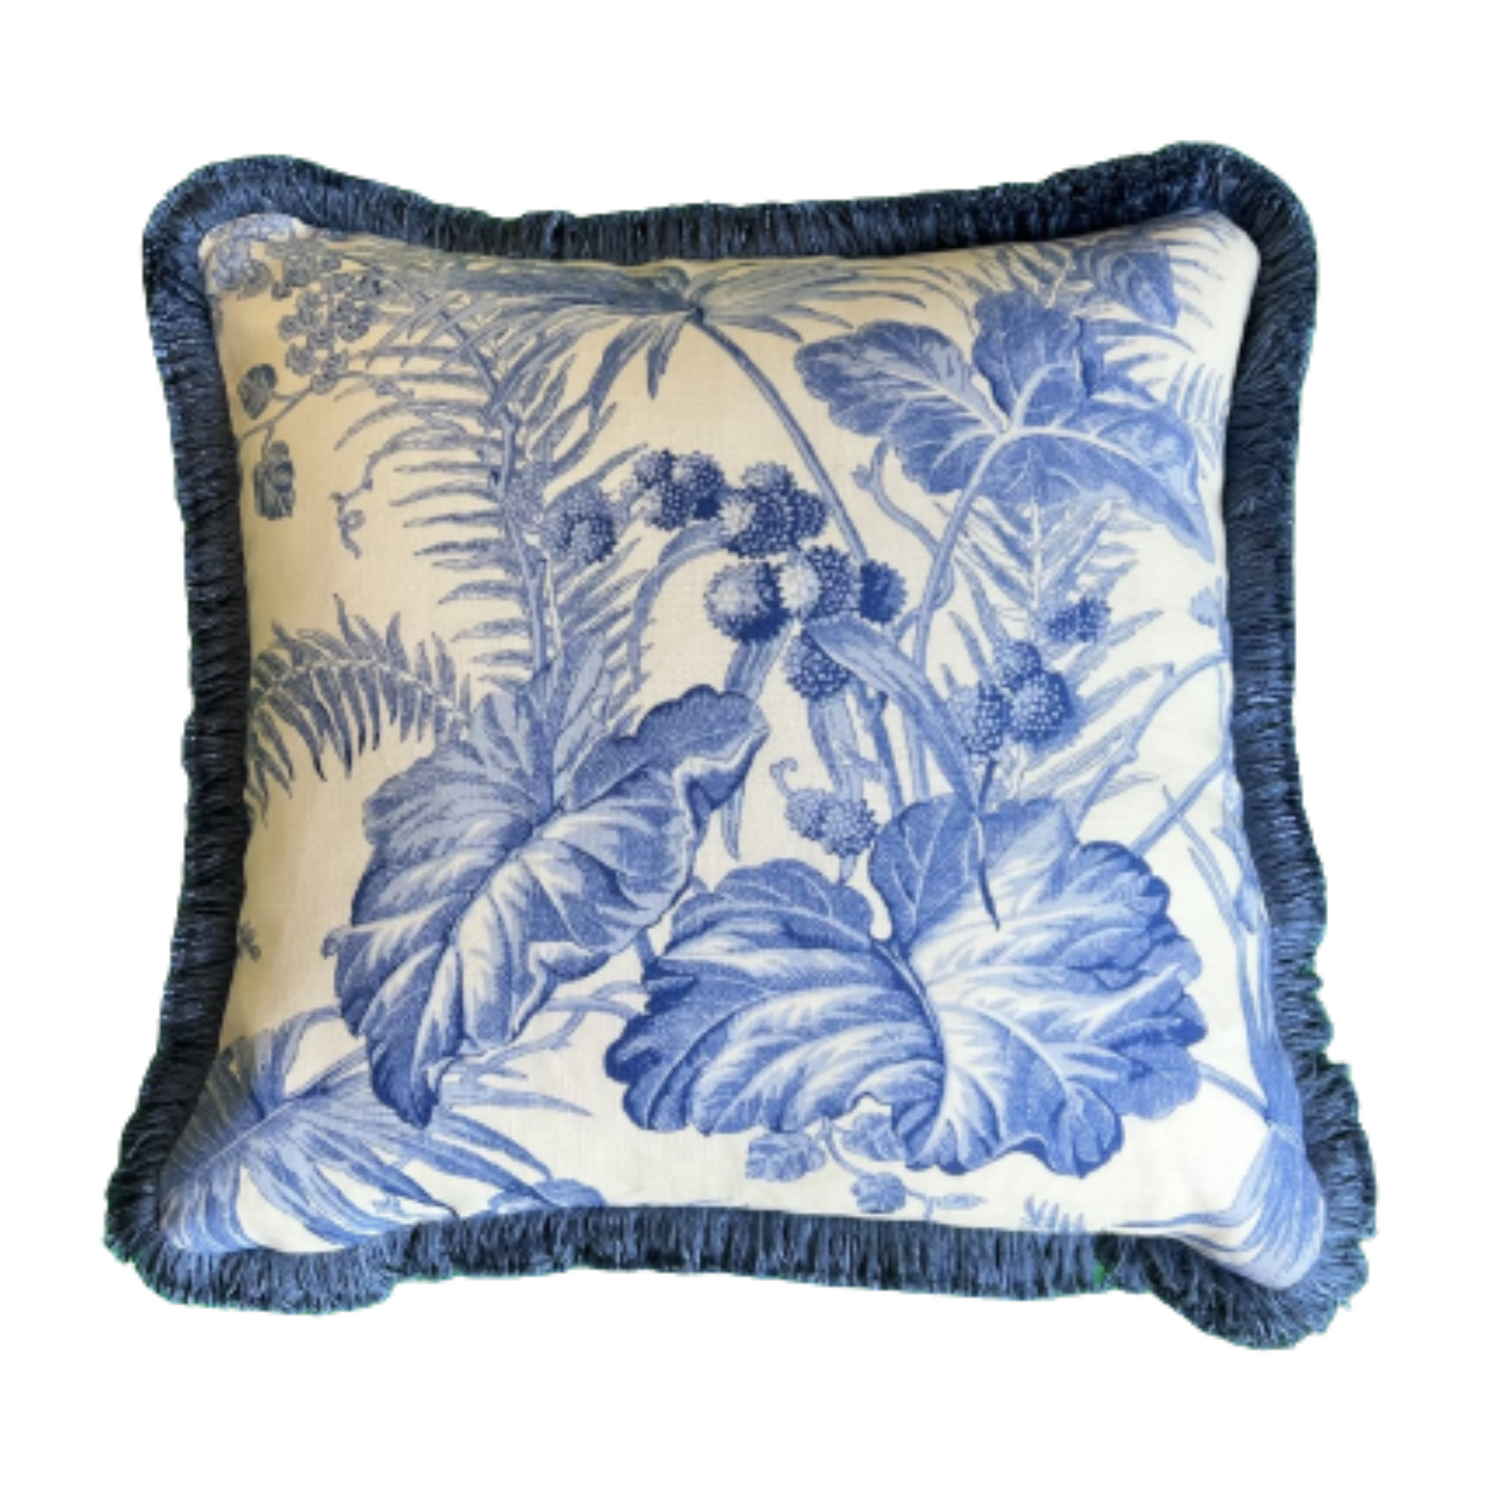 Scalamandre Tropical Toile China Blue Linen Print 16 x 16 Square Decorative Pillow with Down Feather Insert